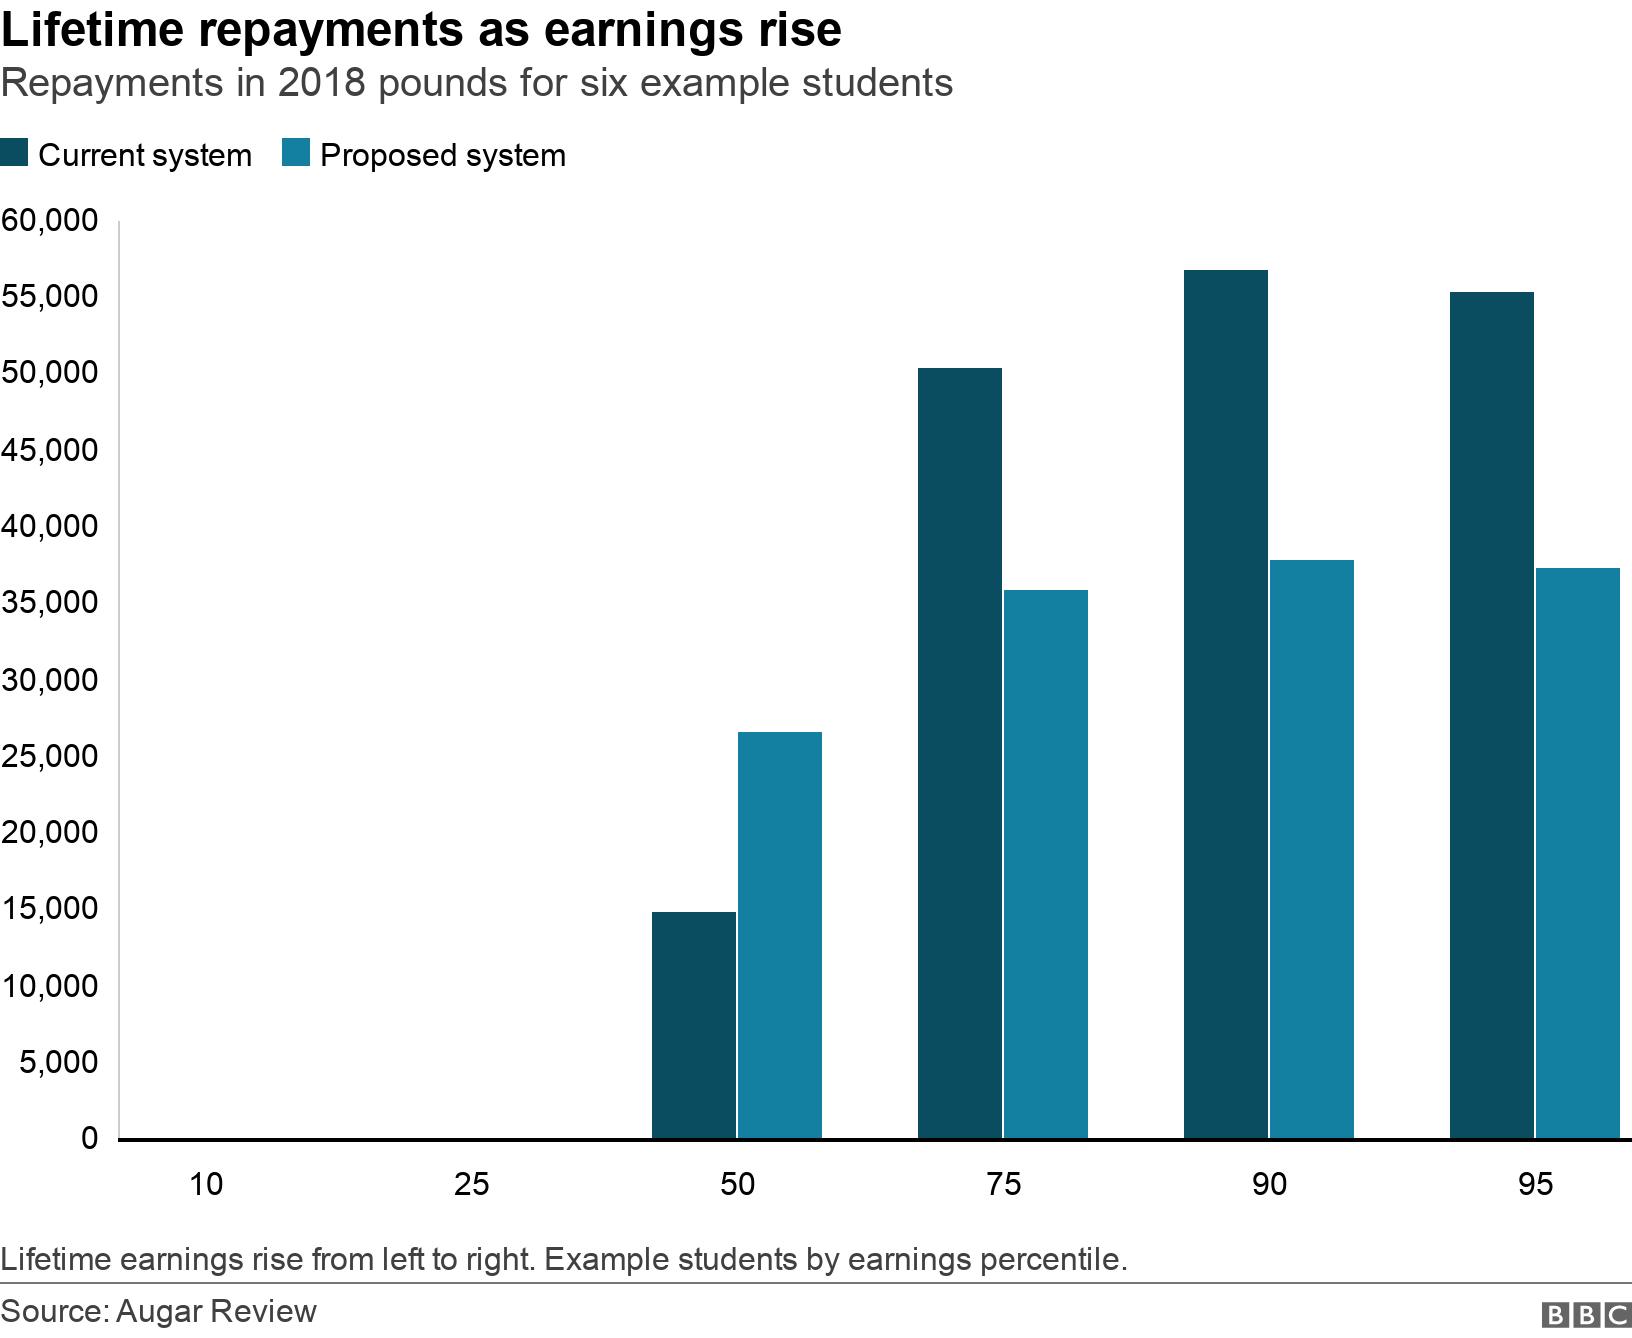 Lifetime repayments as earnings rise. Repayments in 2018 pounds for six example students. Lifetime earnings rise from left to right. Example students by earnings percentile..